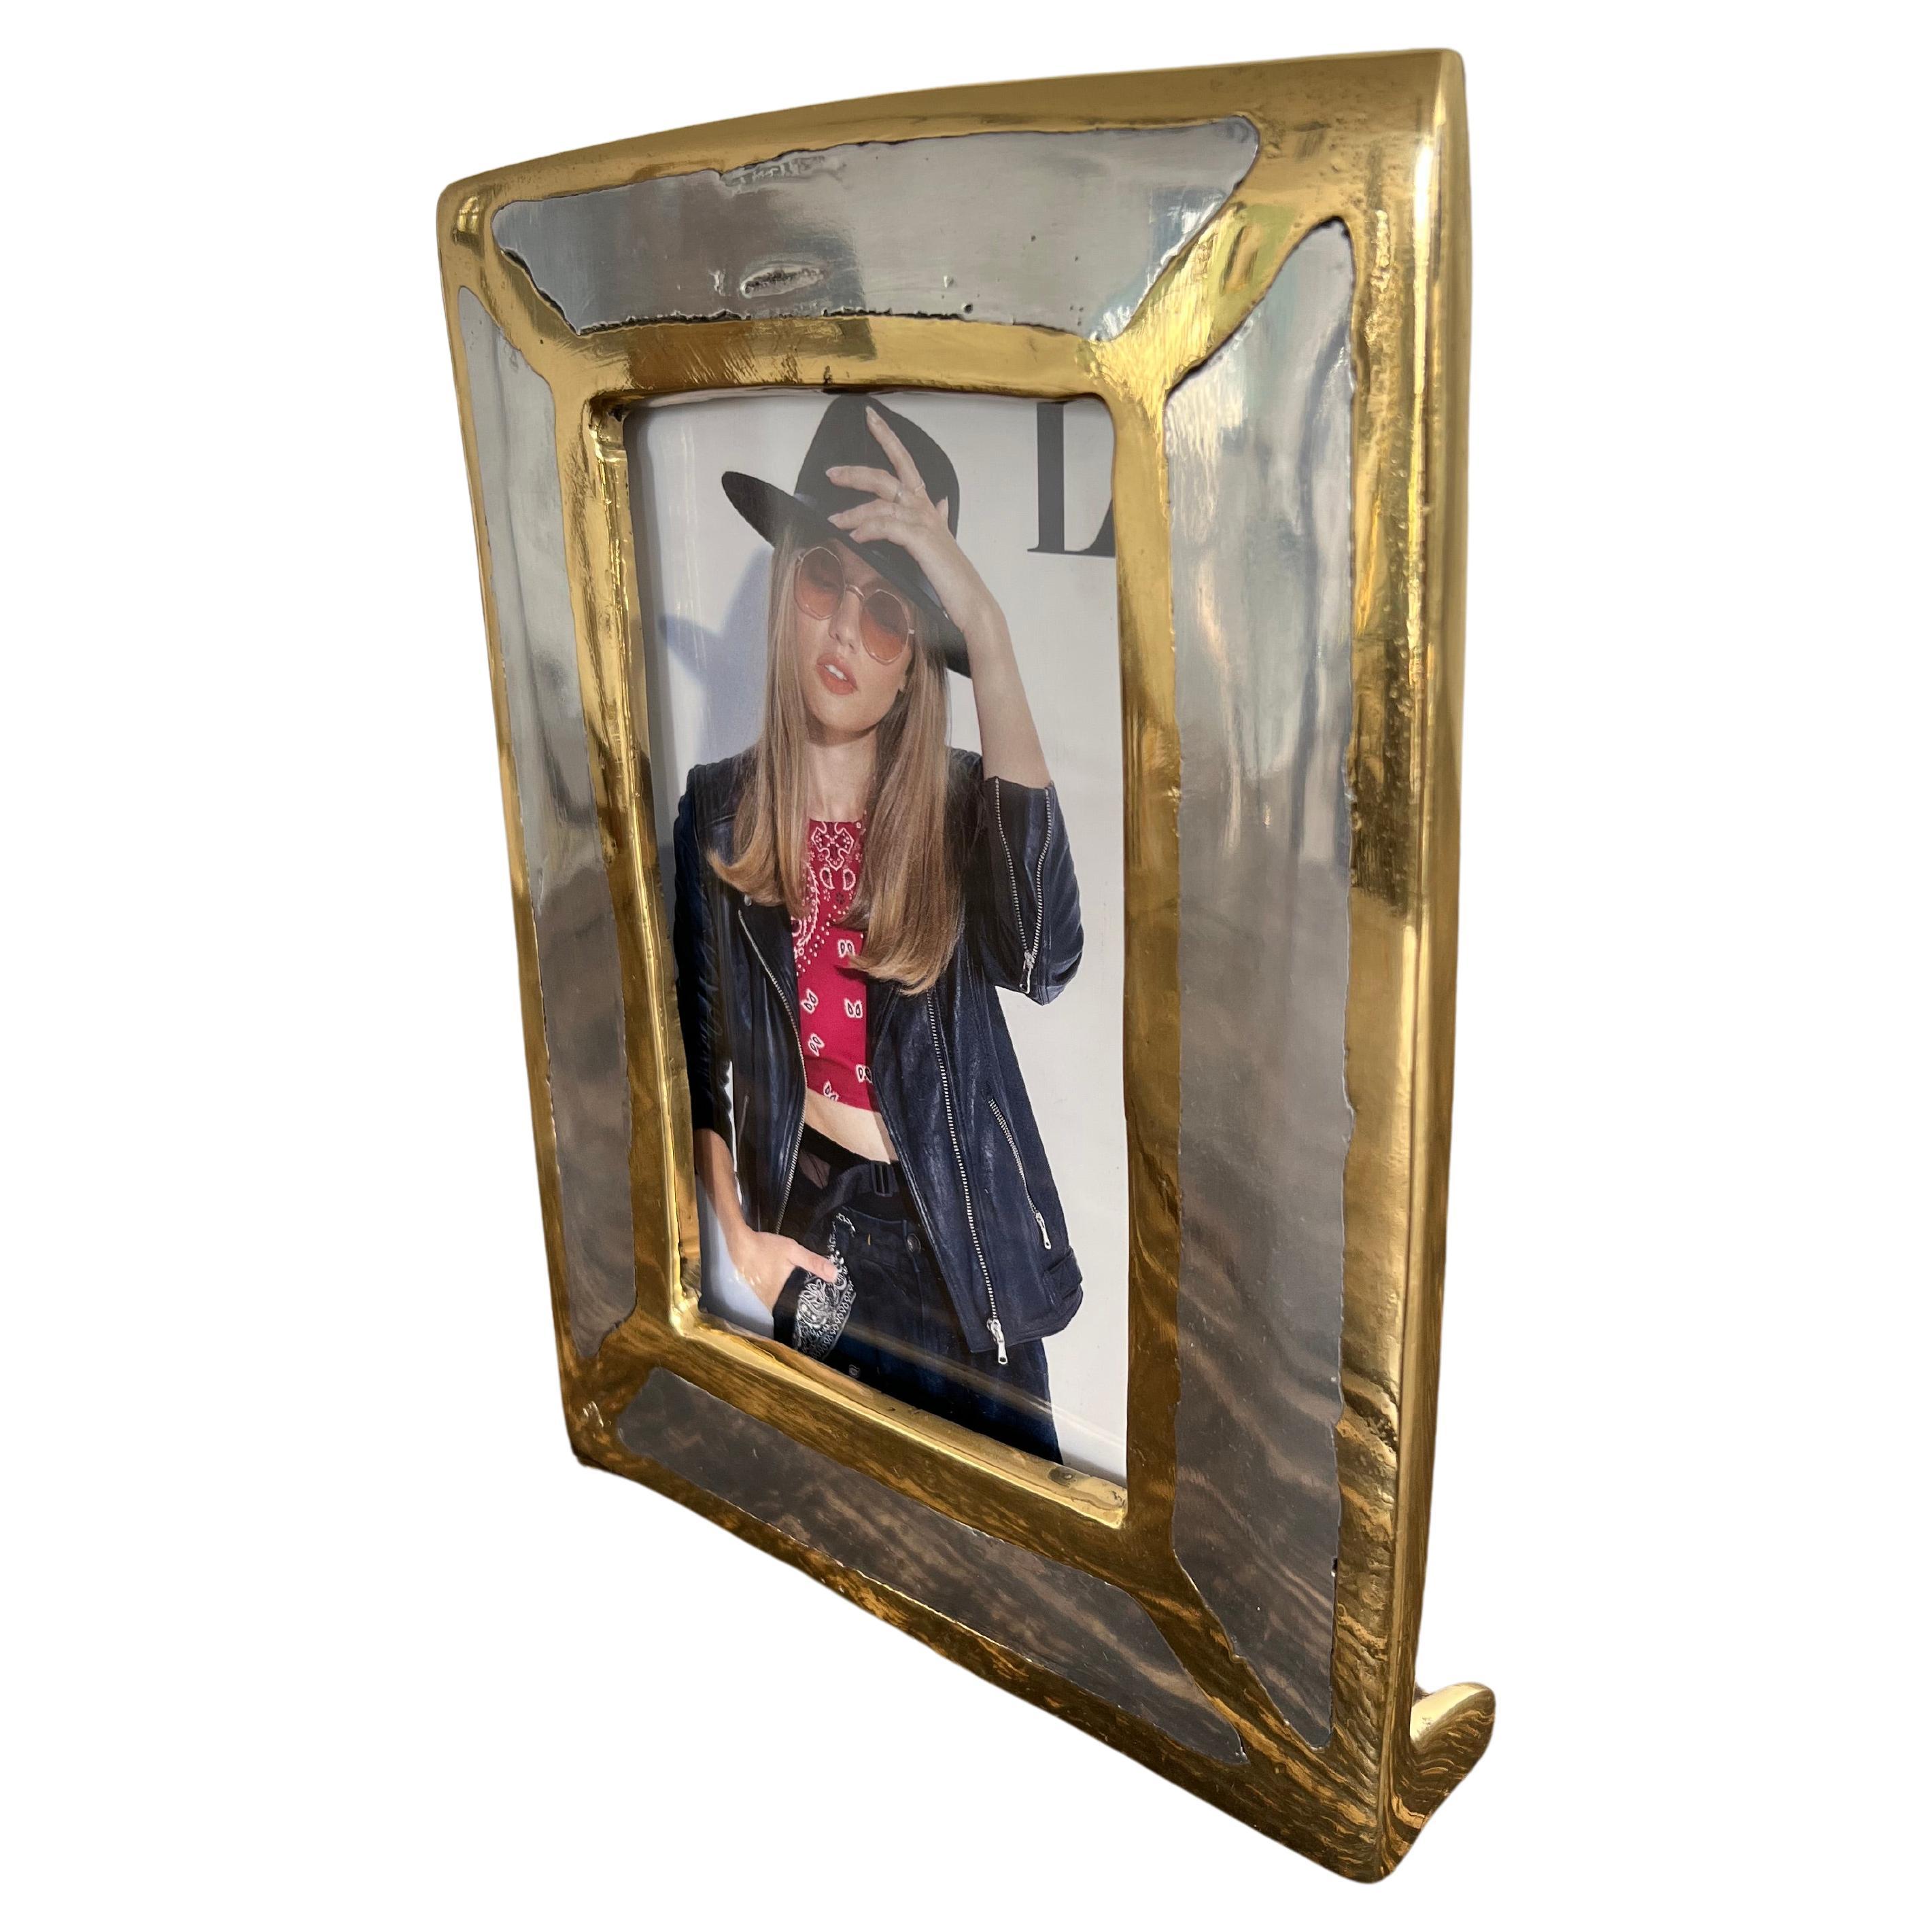 The decorative diagonal picture frame was created by David Marshall, it is made of sand cast aluminum and sand cast brass.
Handmade, mounted and finished in our foundry and workshop in Spain from recycled materials.
Certified authentic by the